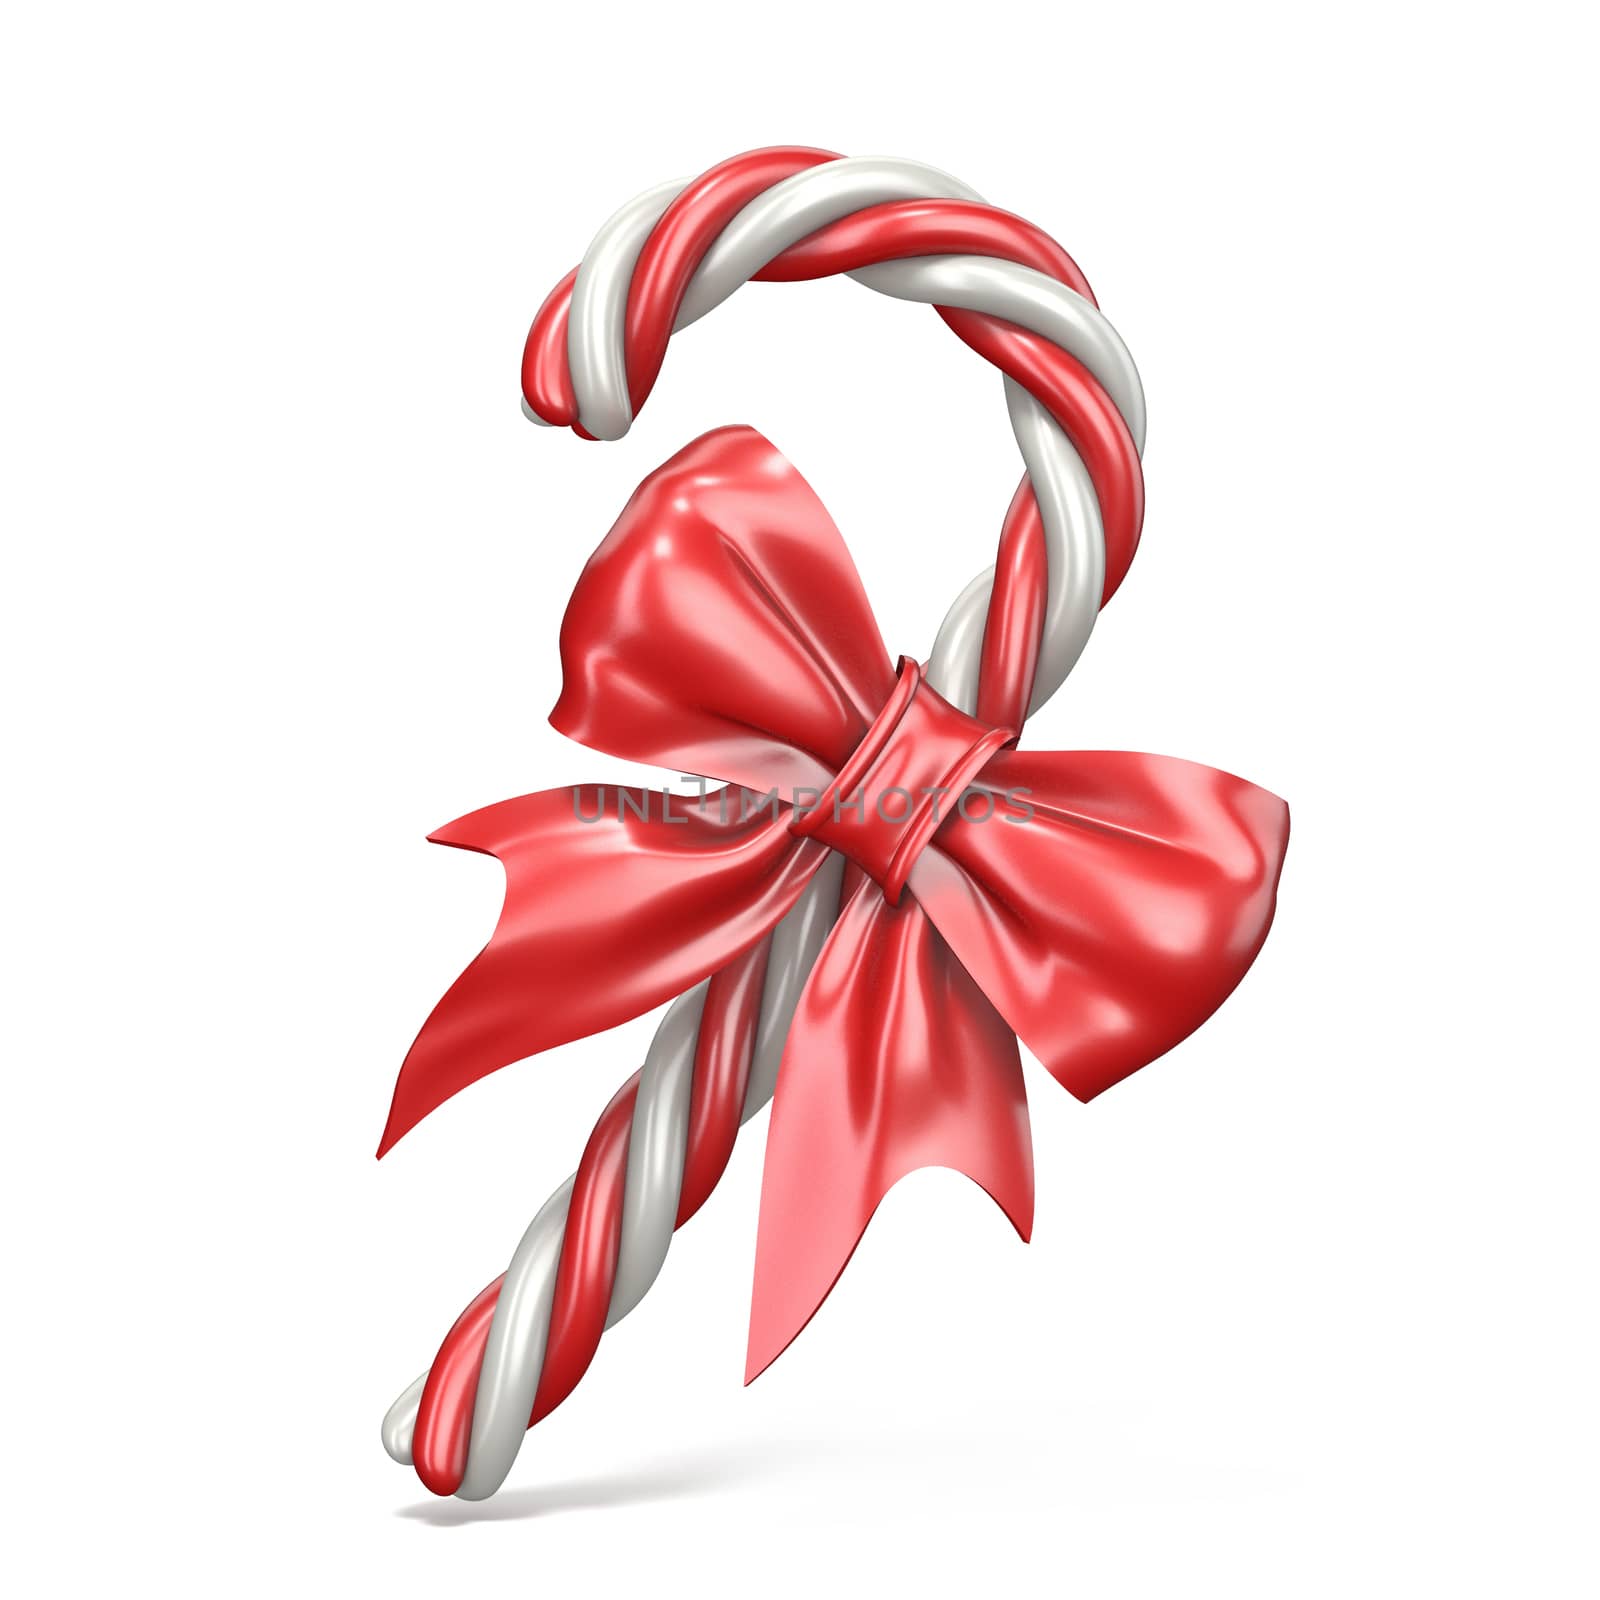 Christmas decoration made of candy cane and ribbon bow 3D render illustration isolated on white background